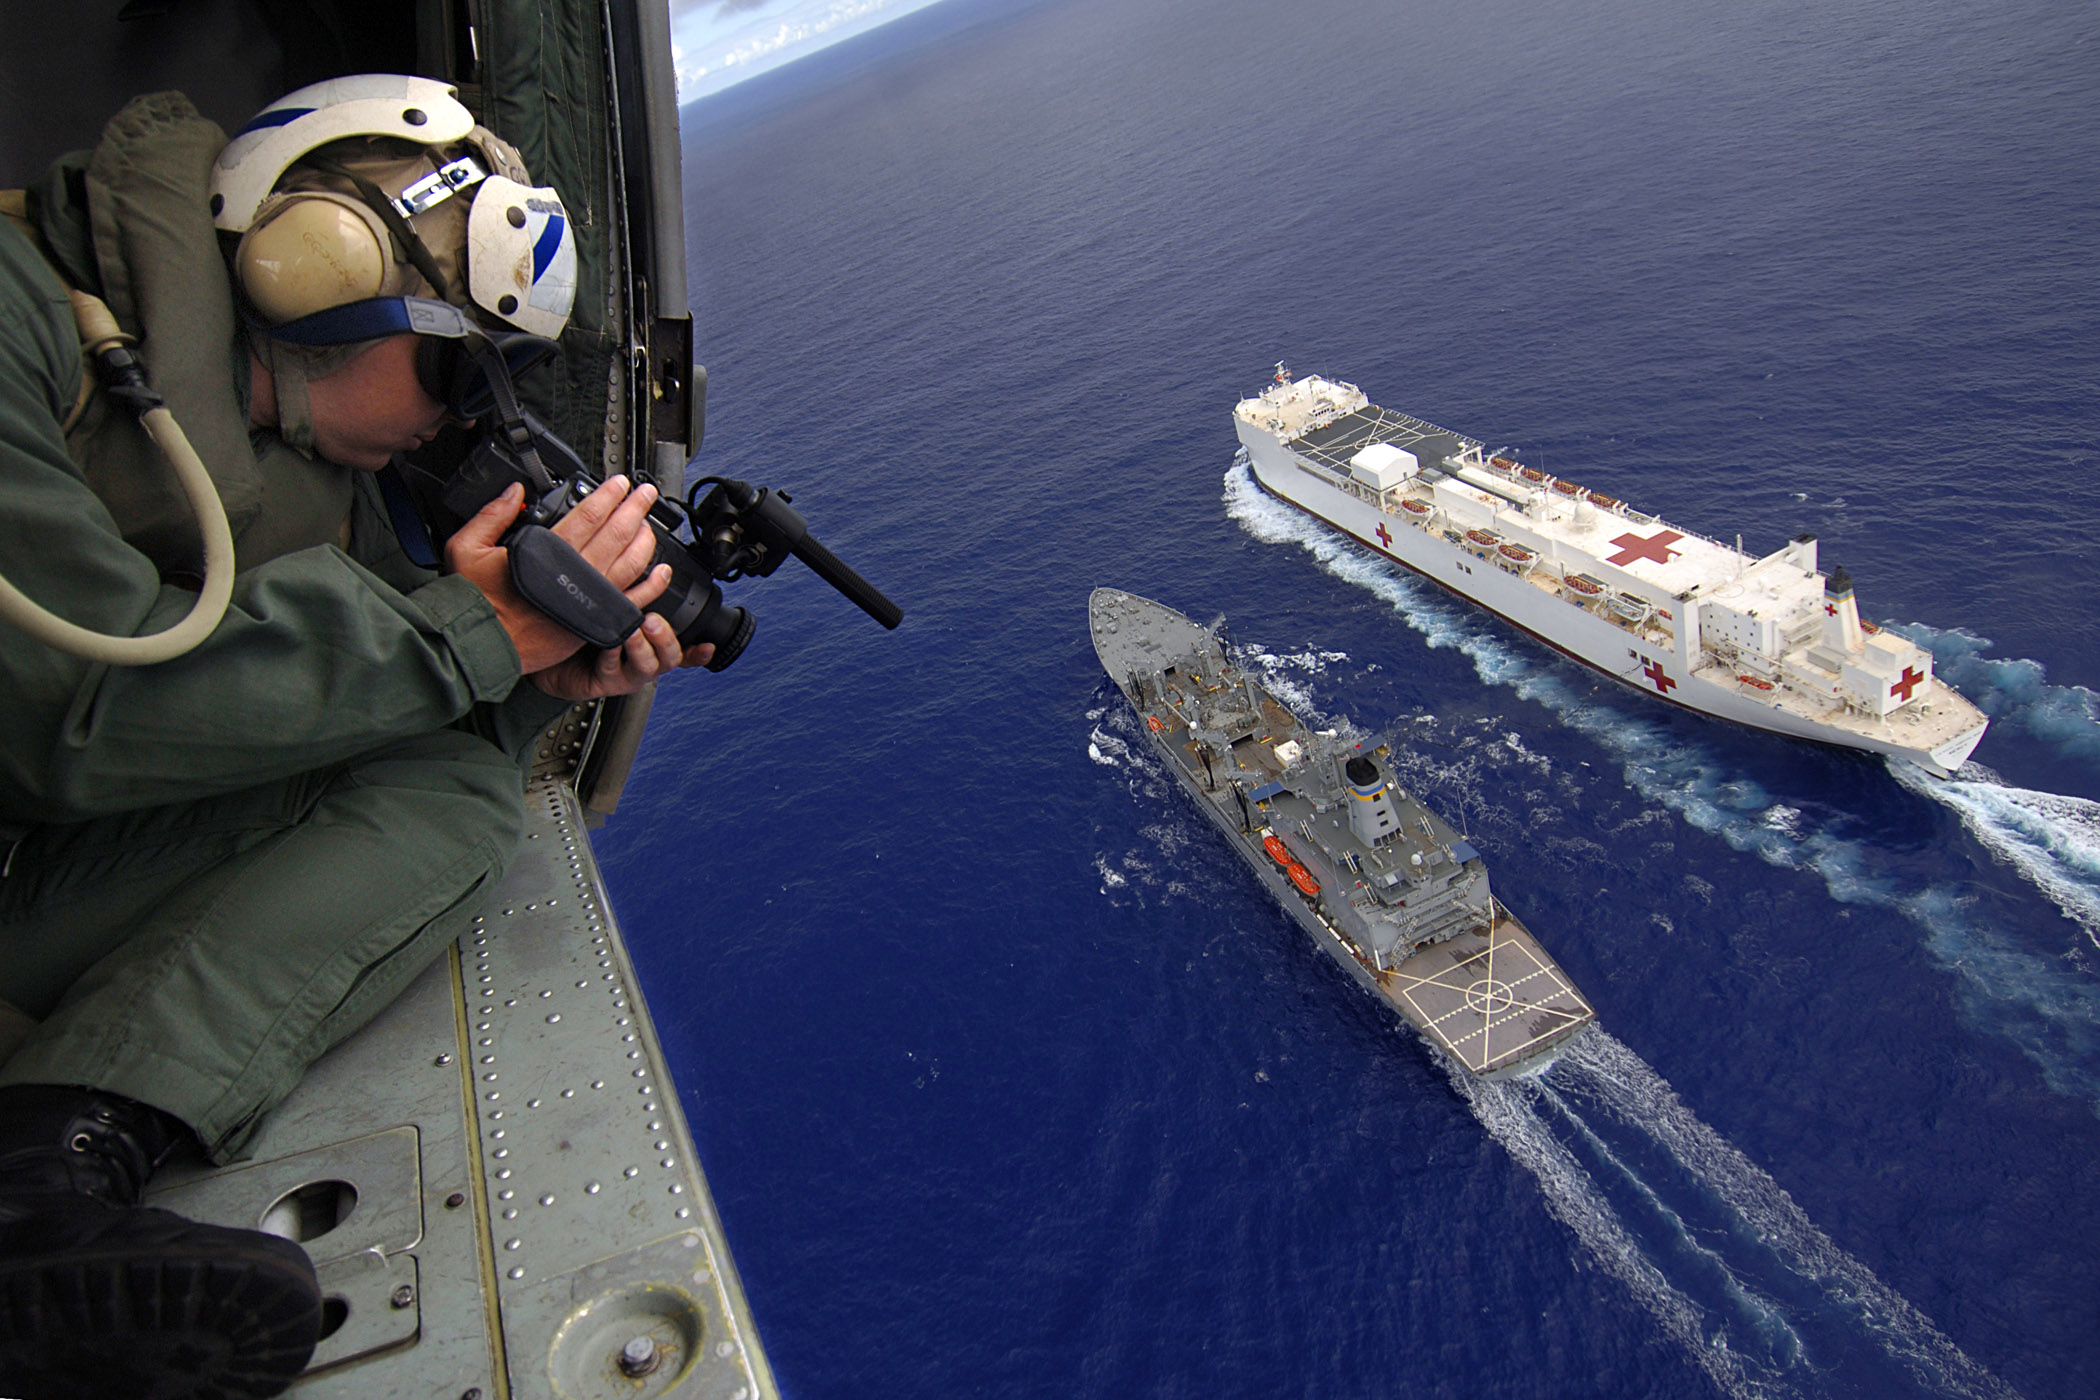 US Navy 060516-N-6501M-029 Photographer's Mate 2nd Class Gregory E. Badger videotapes an underway-replenishment operation between the Military Sealift Command (MSC) hospital ship USNS Mercy (T-AH 19) and the MSC replenishment